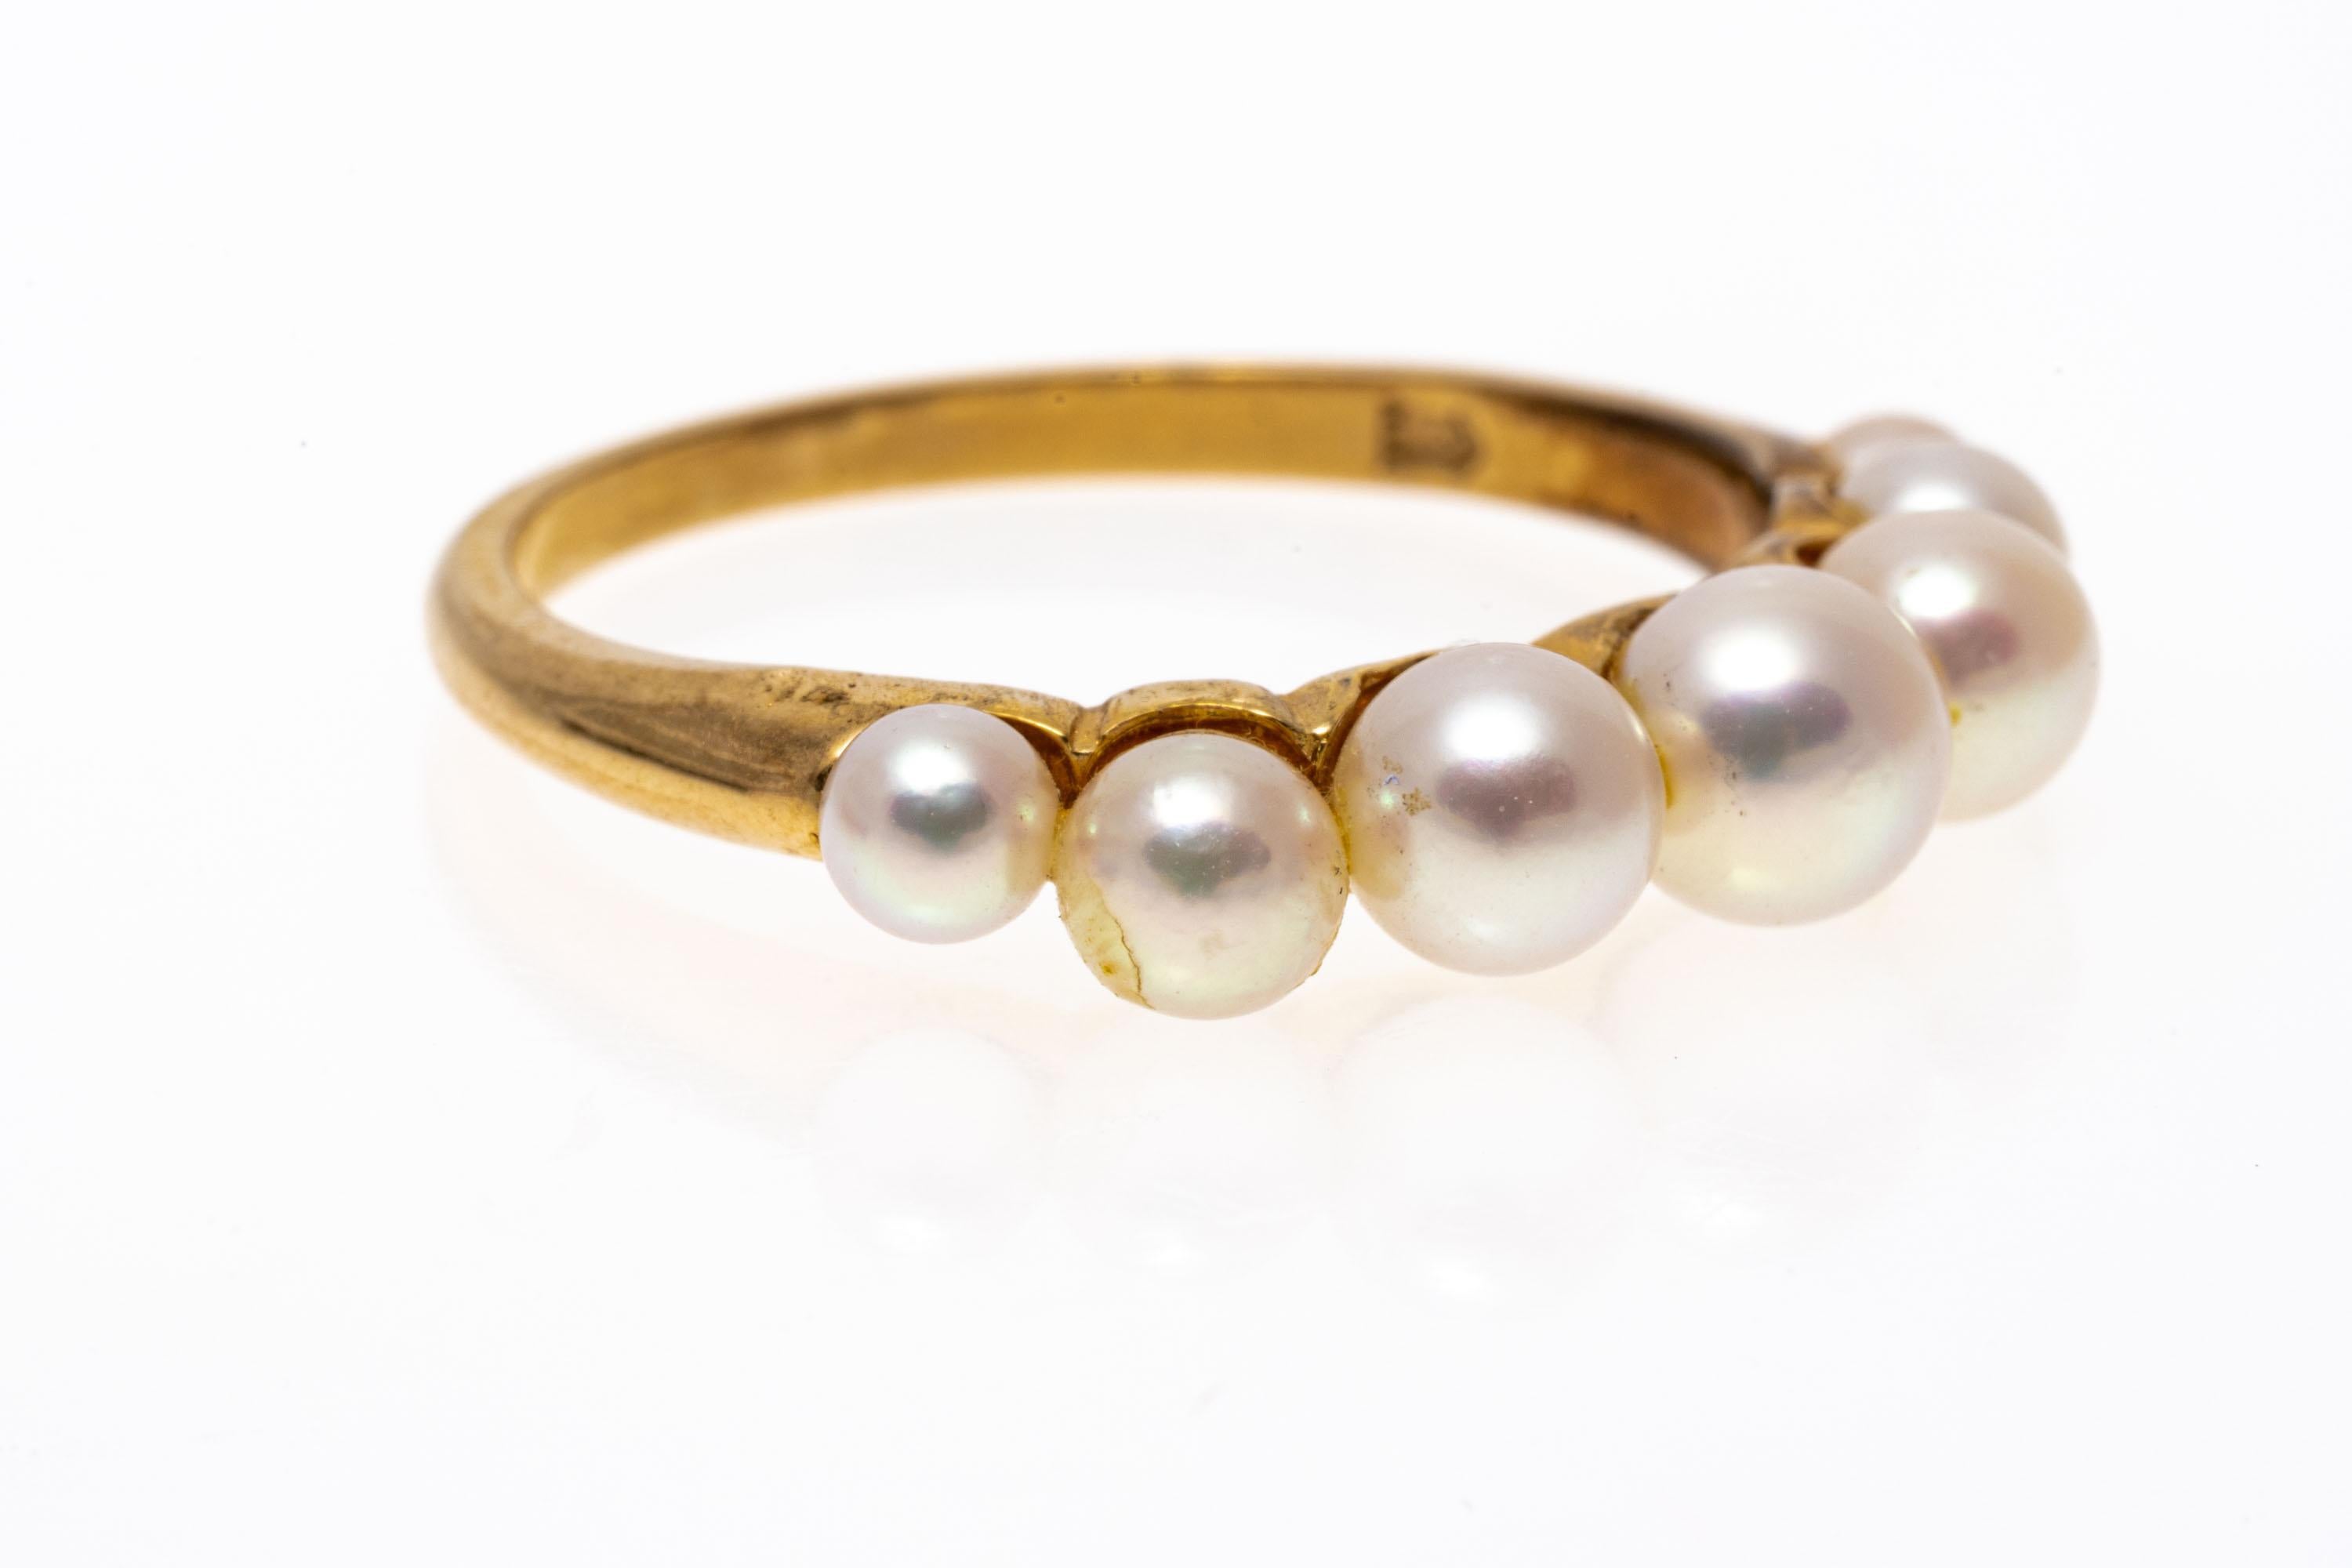 14K yellow gold ring. This pretty ring is a simple band of graduated pink and white toned, cultured pearls, ranging from 3.0 mm to 4.5 mm, and finished with a narrow, high polished shank.
Marks: 14K
Dimensions: 13/16